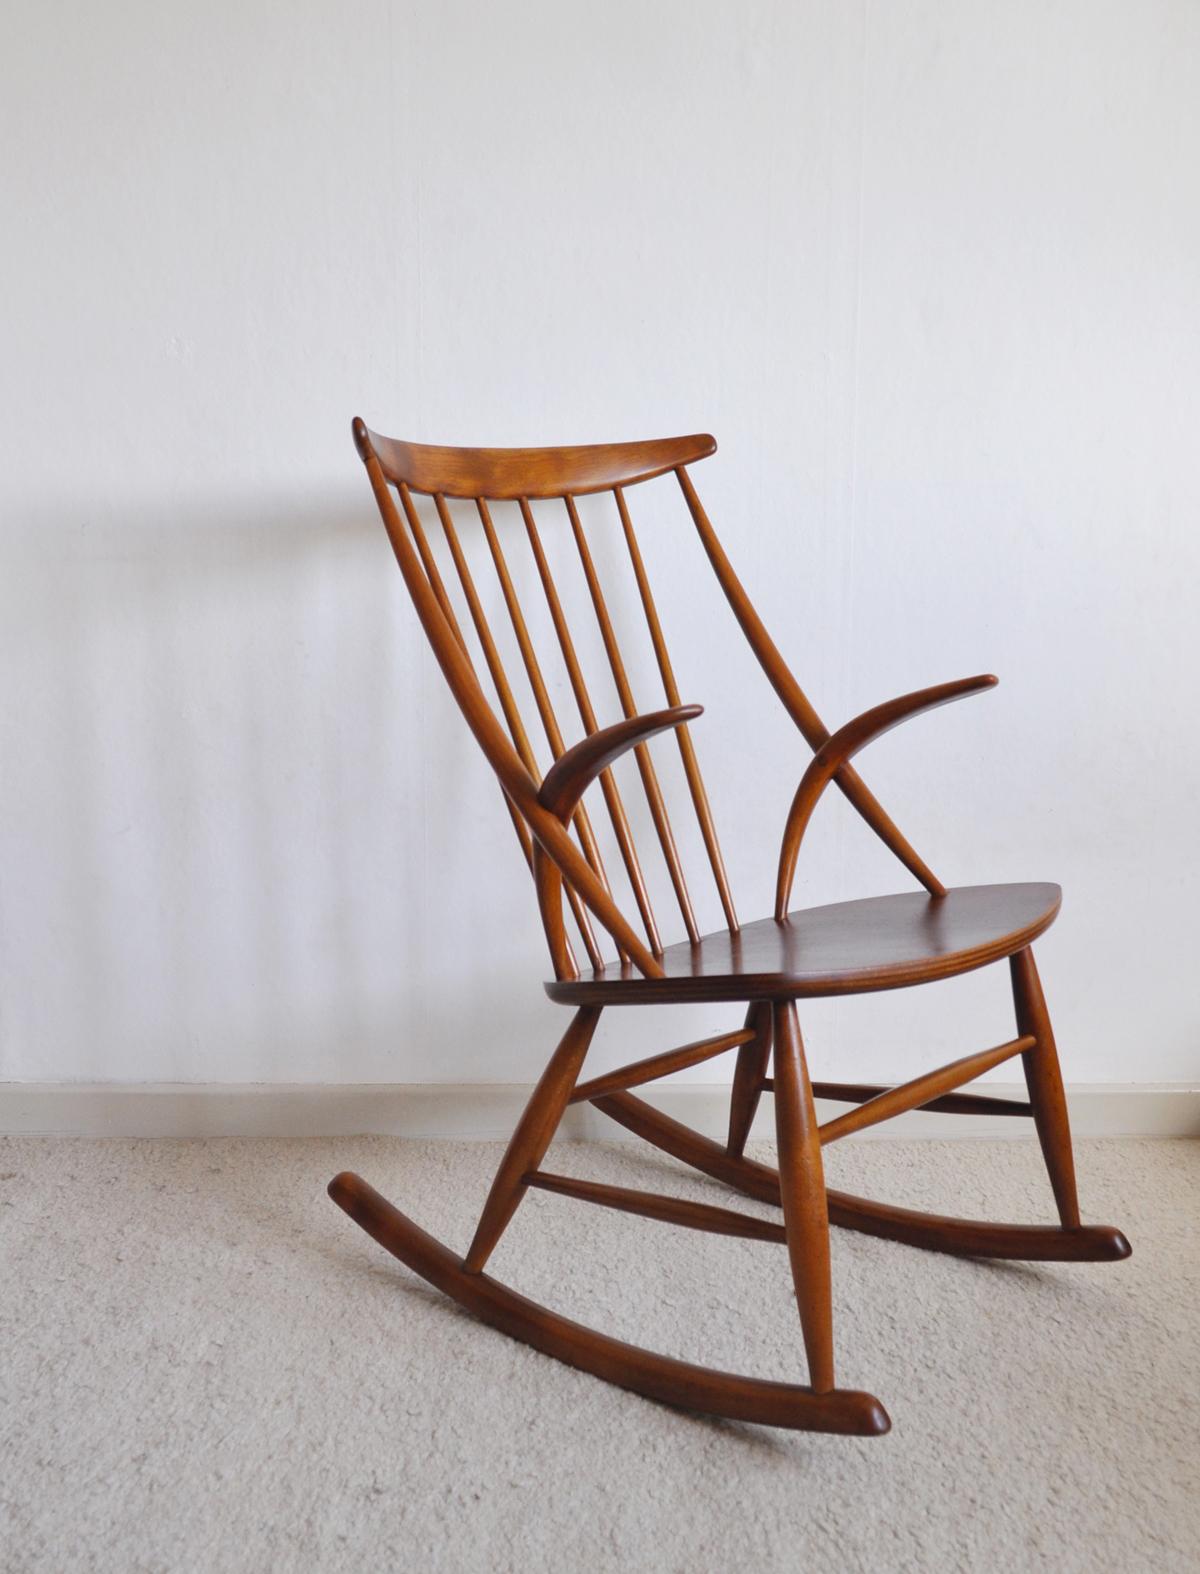 Beautiful organically shaped rocking chair designed by Illum Wikkelsø in 1958-1959 for Niels Eilersen Møbler, Denmark.

The chair is made in beechwood and mahogany. Gently restored.